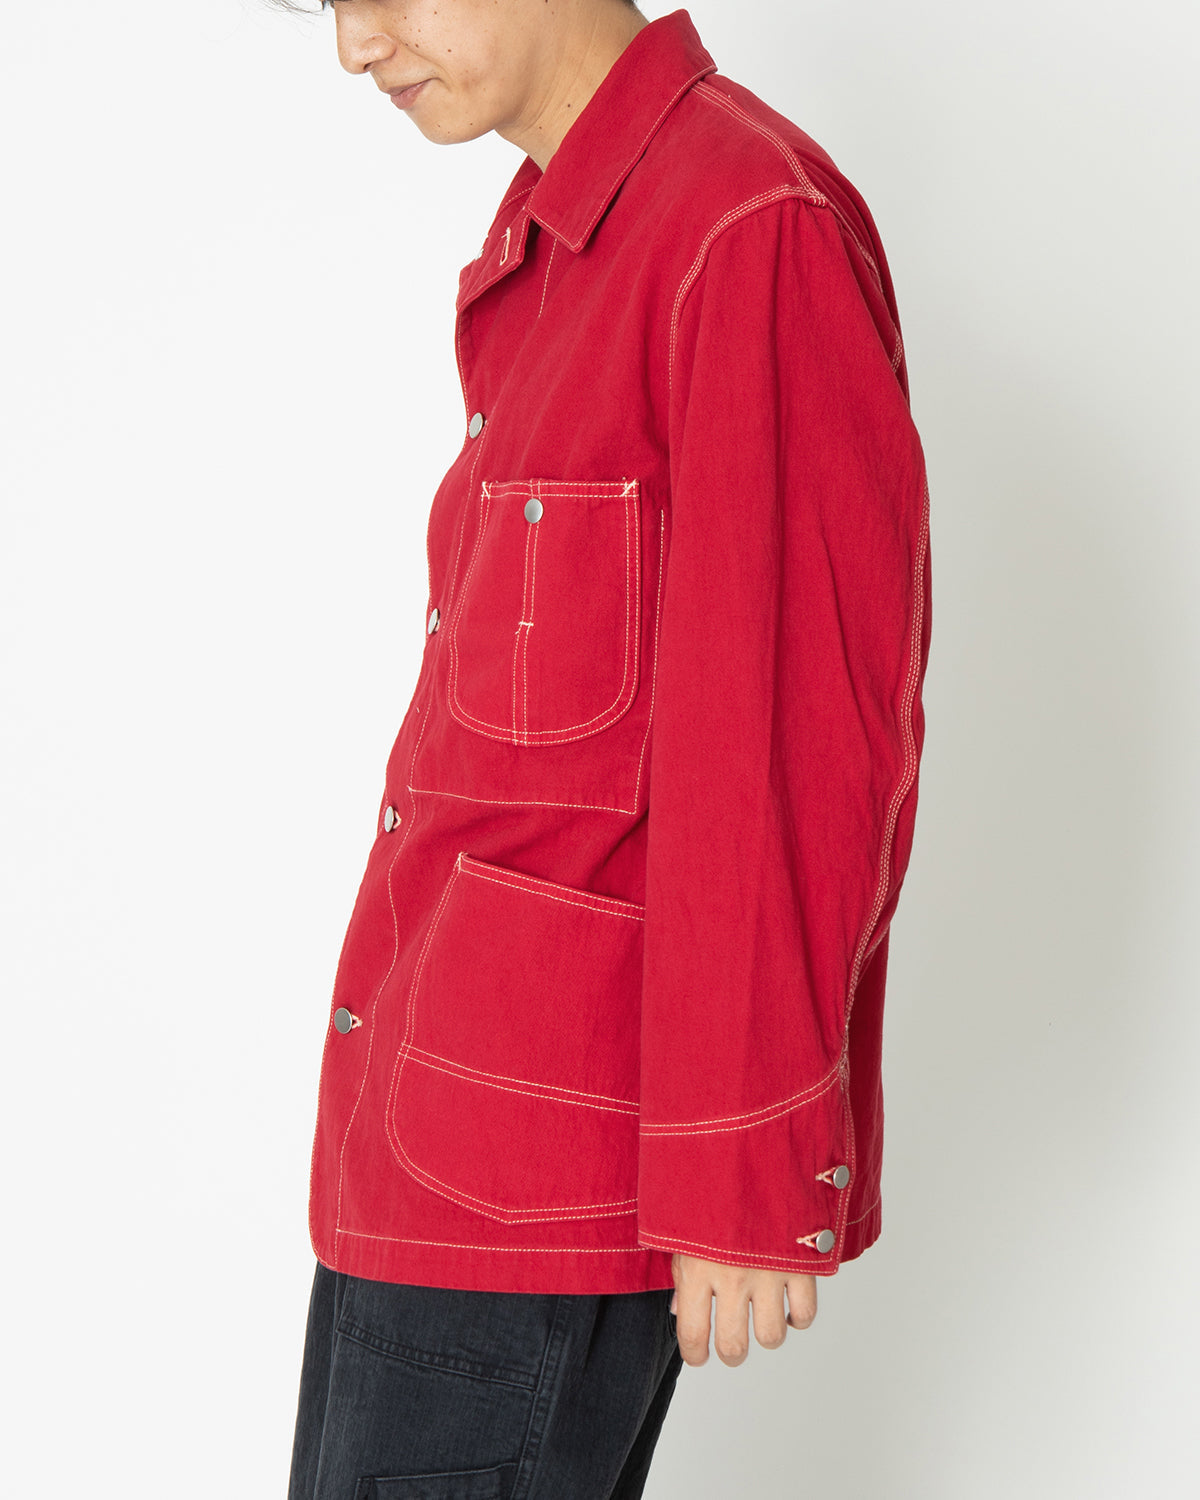 APRESSE  COVERALL JACKET RED size3